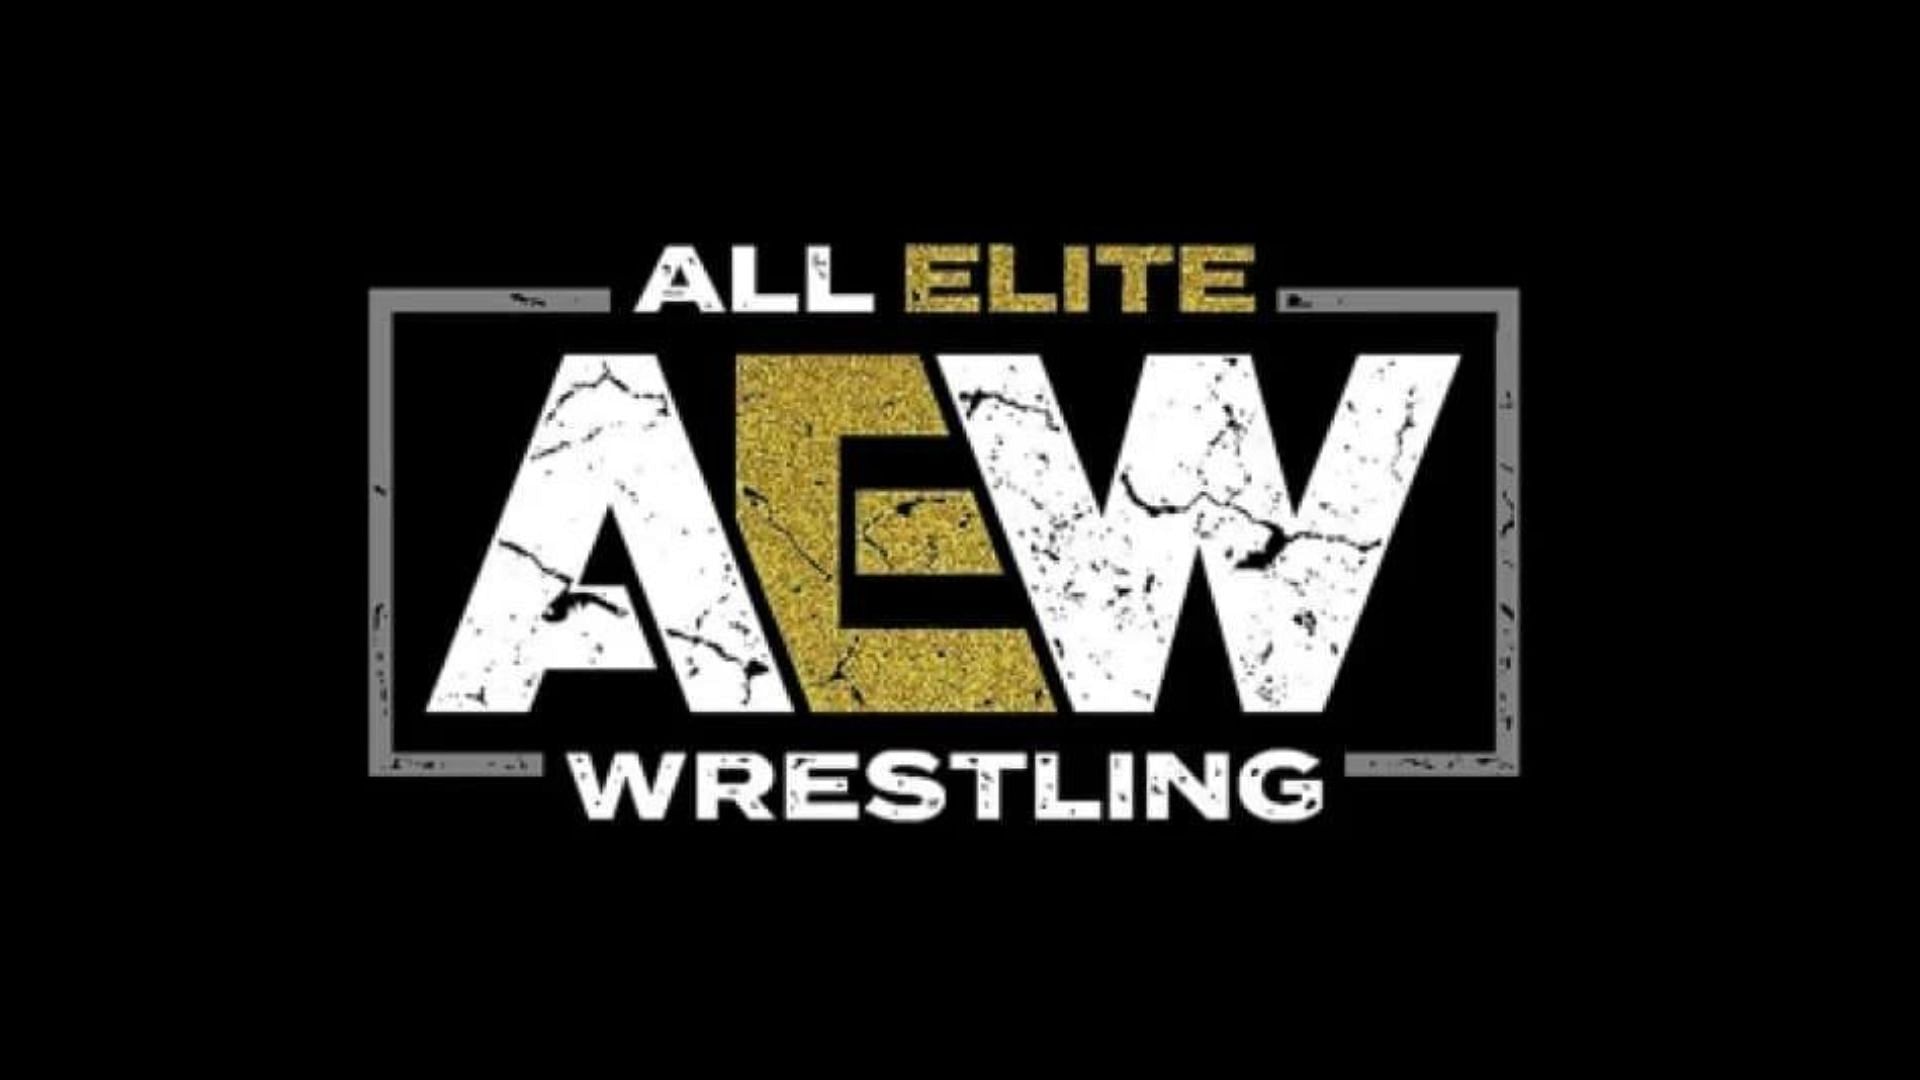 AEW is the rival promotion to WWE